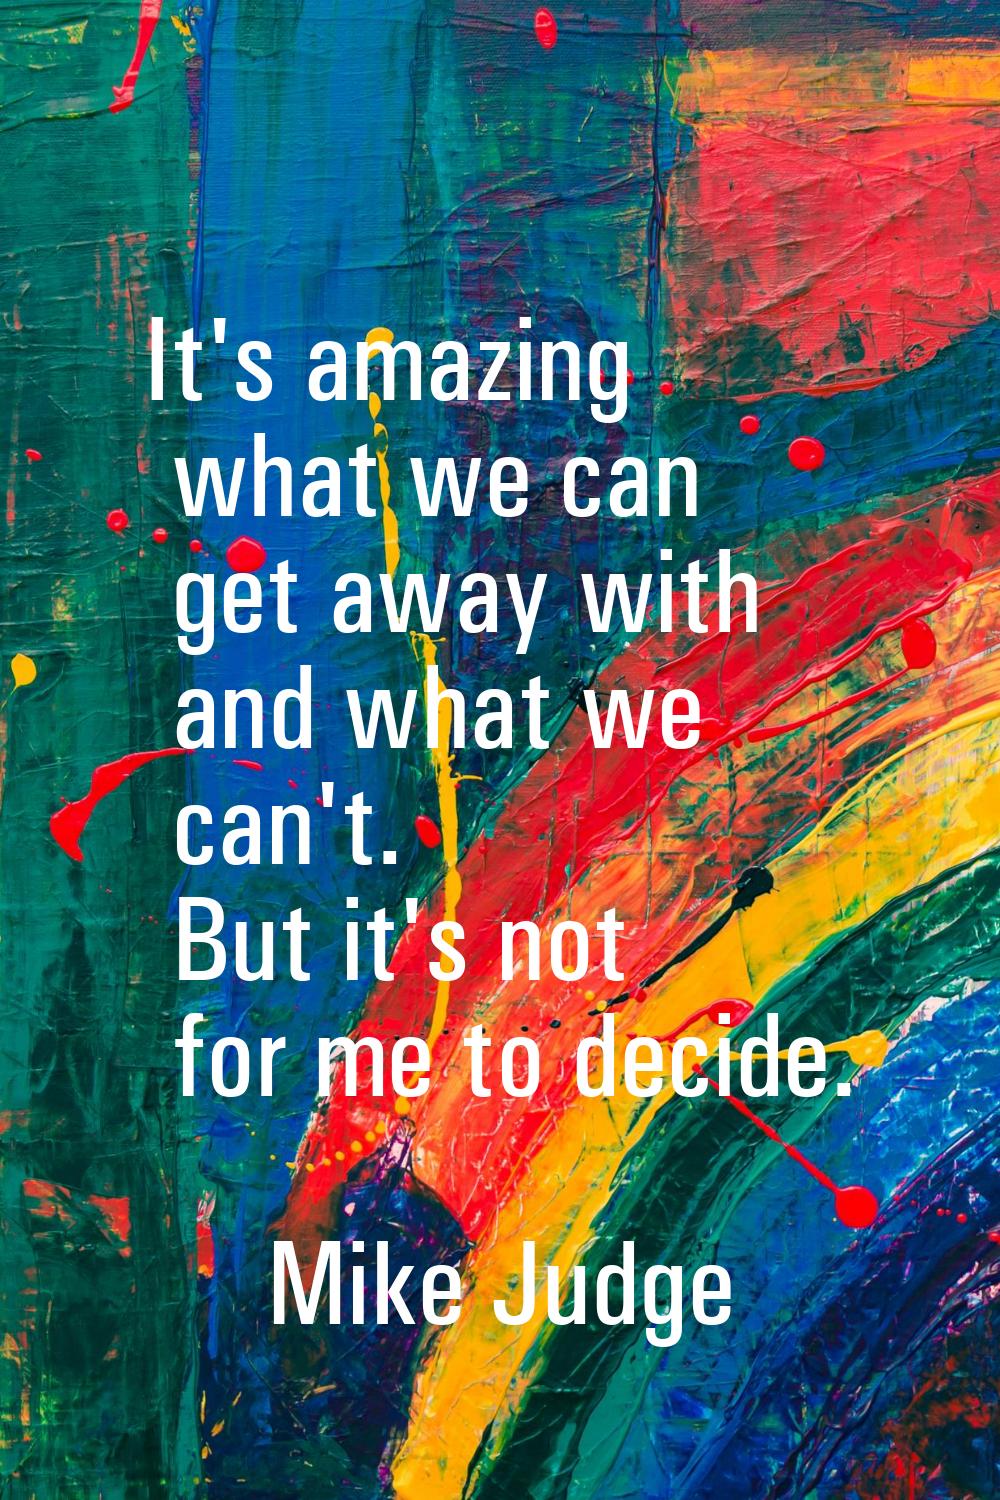 It's amazing what we can get away with and what we can't. But it's not for me to decide.